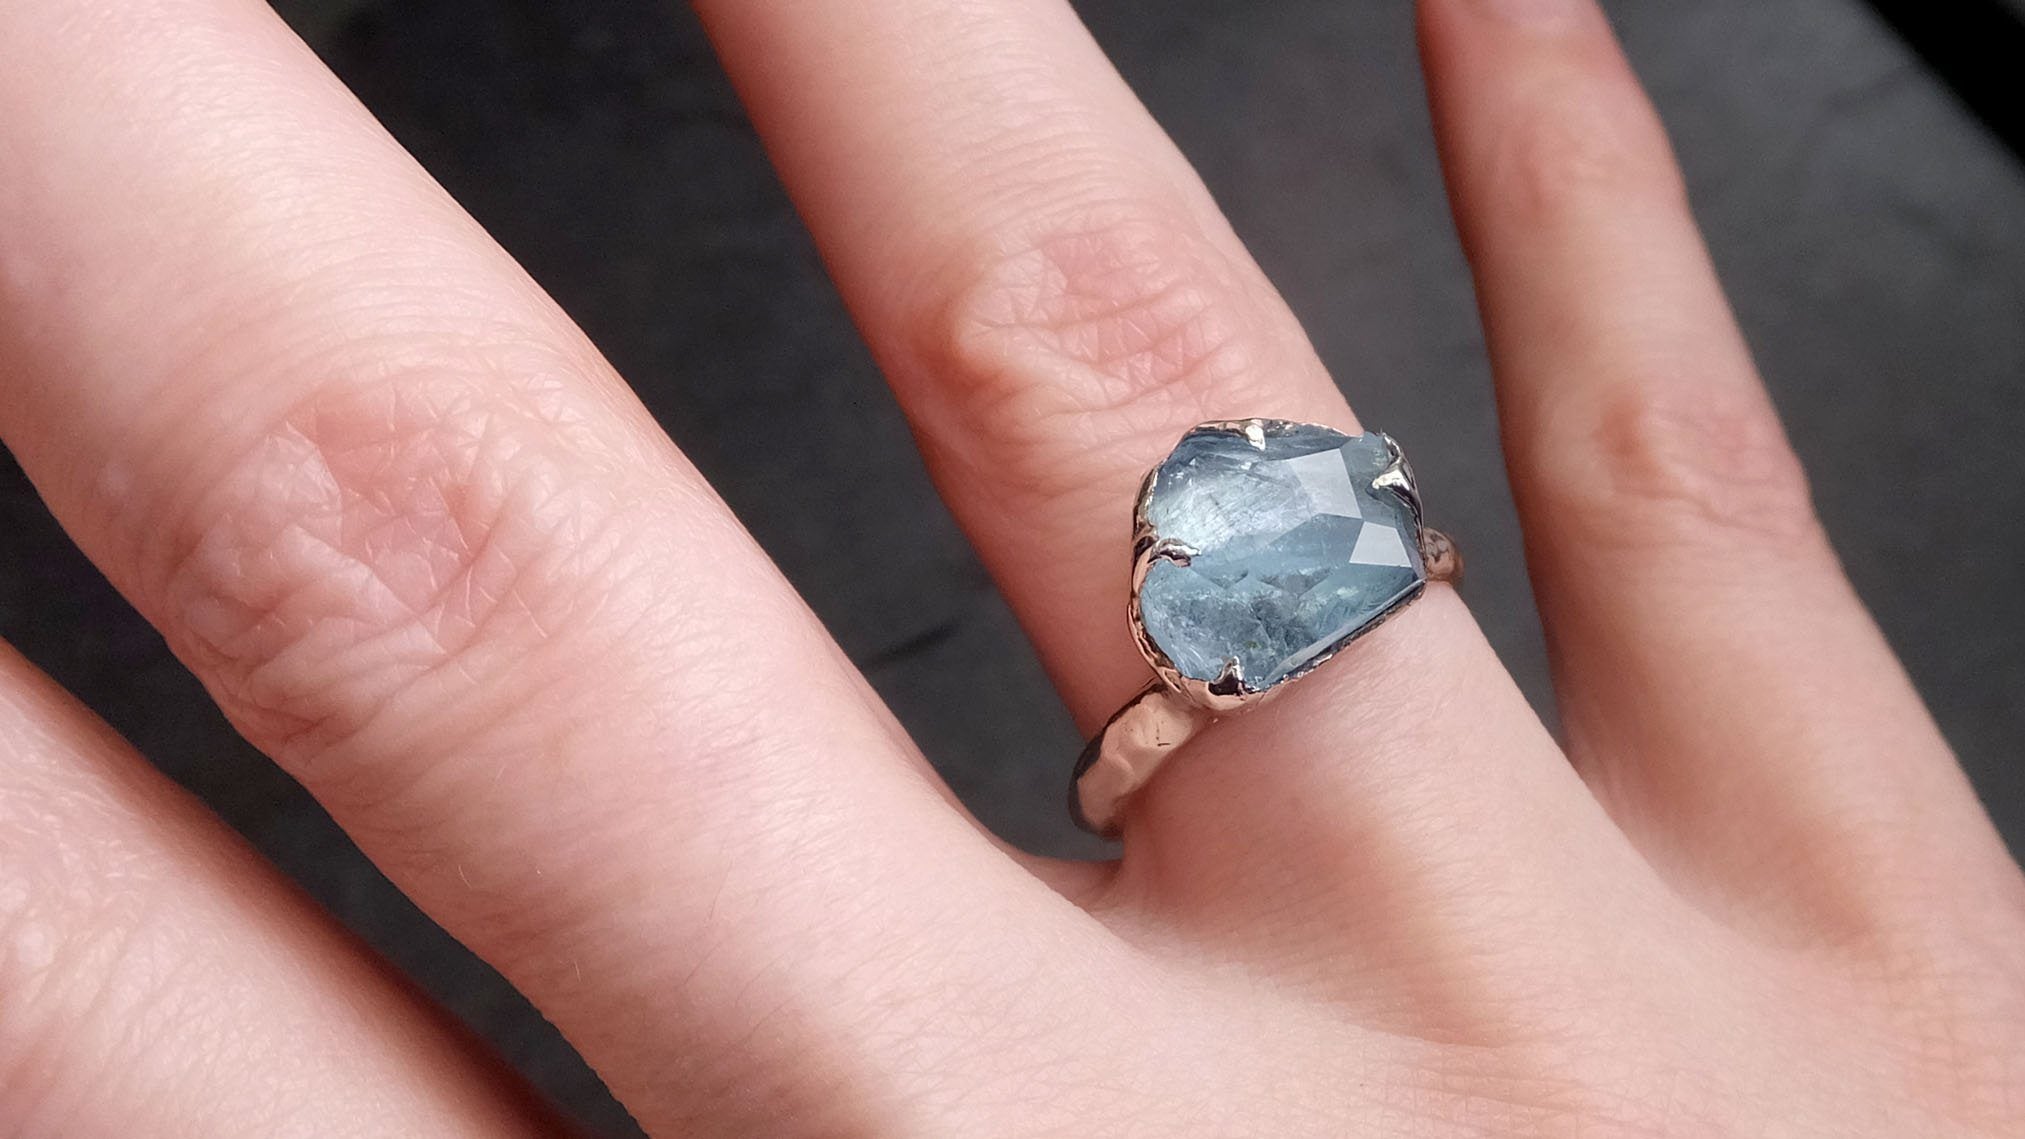 partially faceted aquamarine white 18k gold solitaire ring statement wedding ring one of a kind gemstone ring bespoke 2130 Alternative Engagement